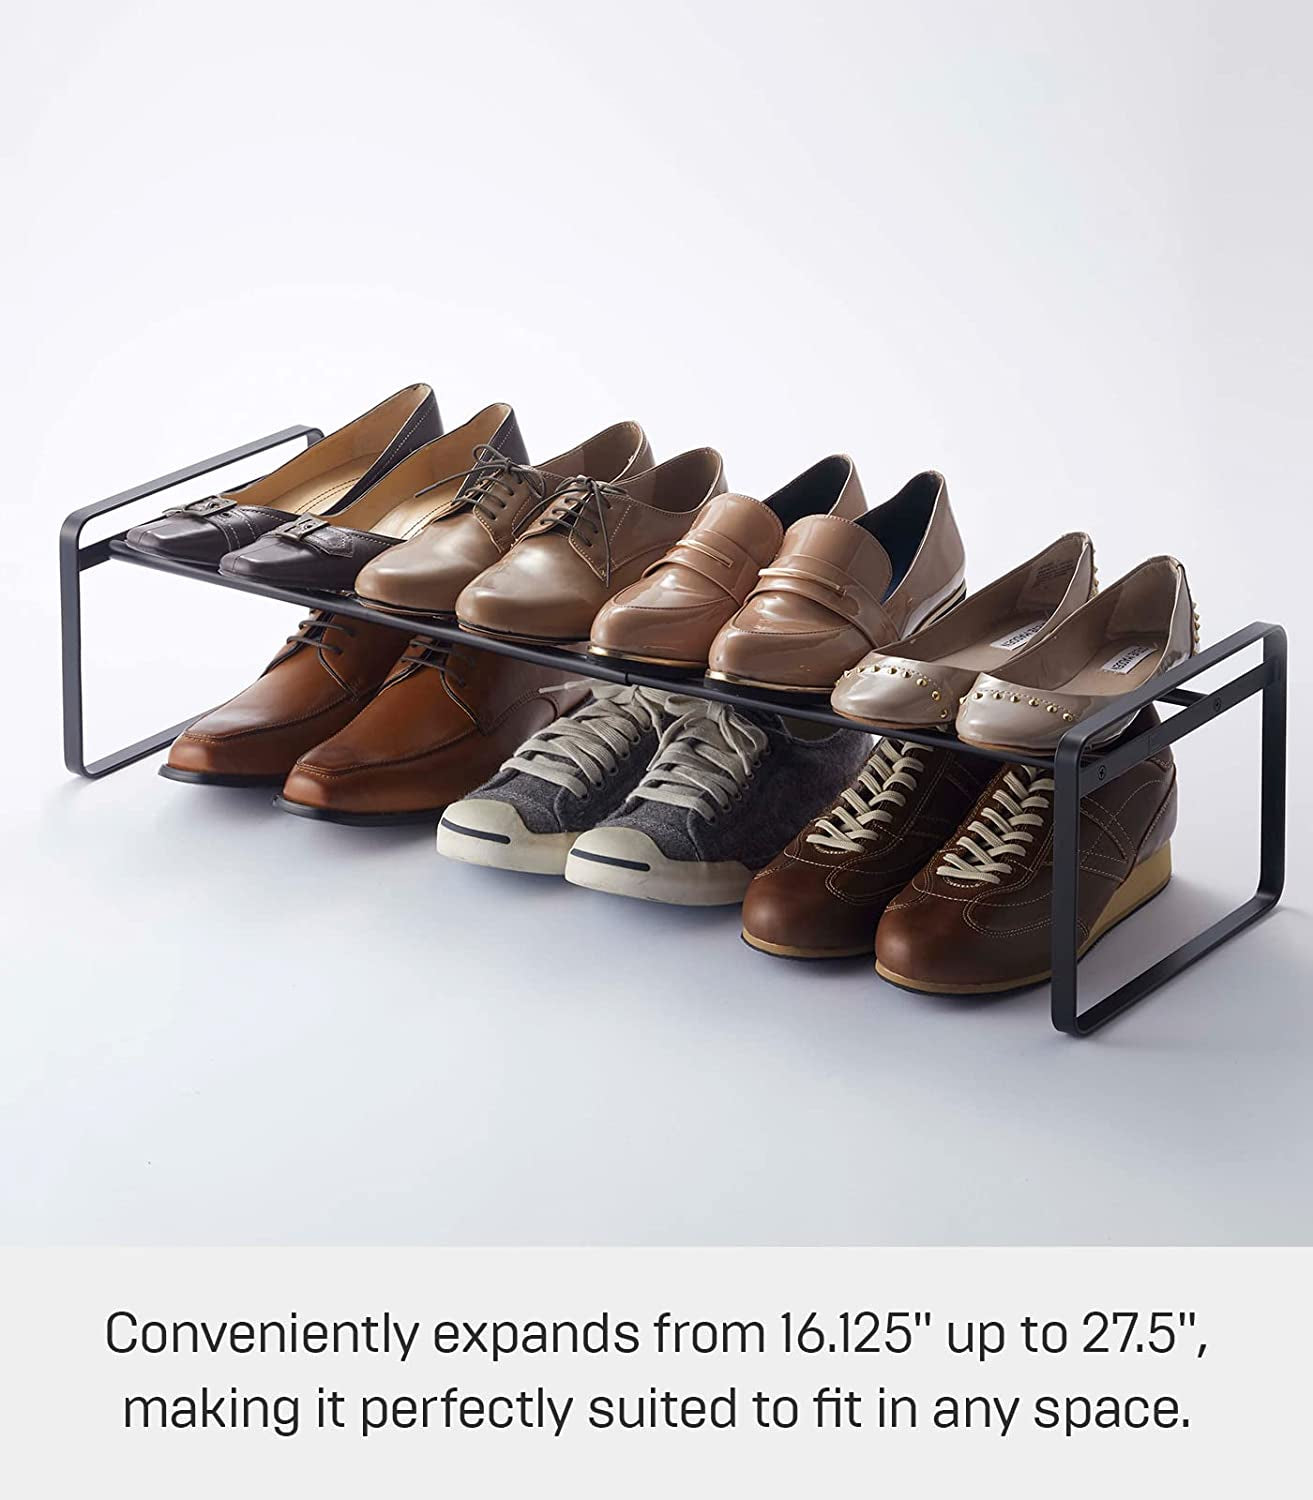 Space-Saving Storage Solution: Adjustable Shoe Rack in Black, One Size